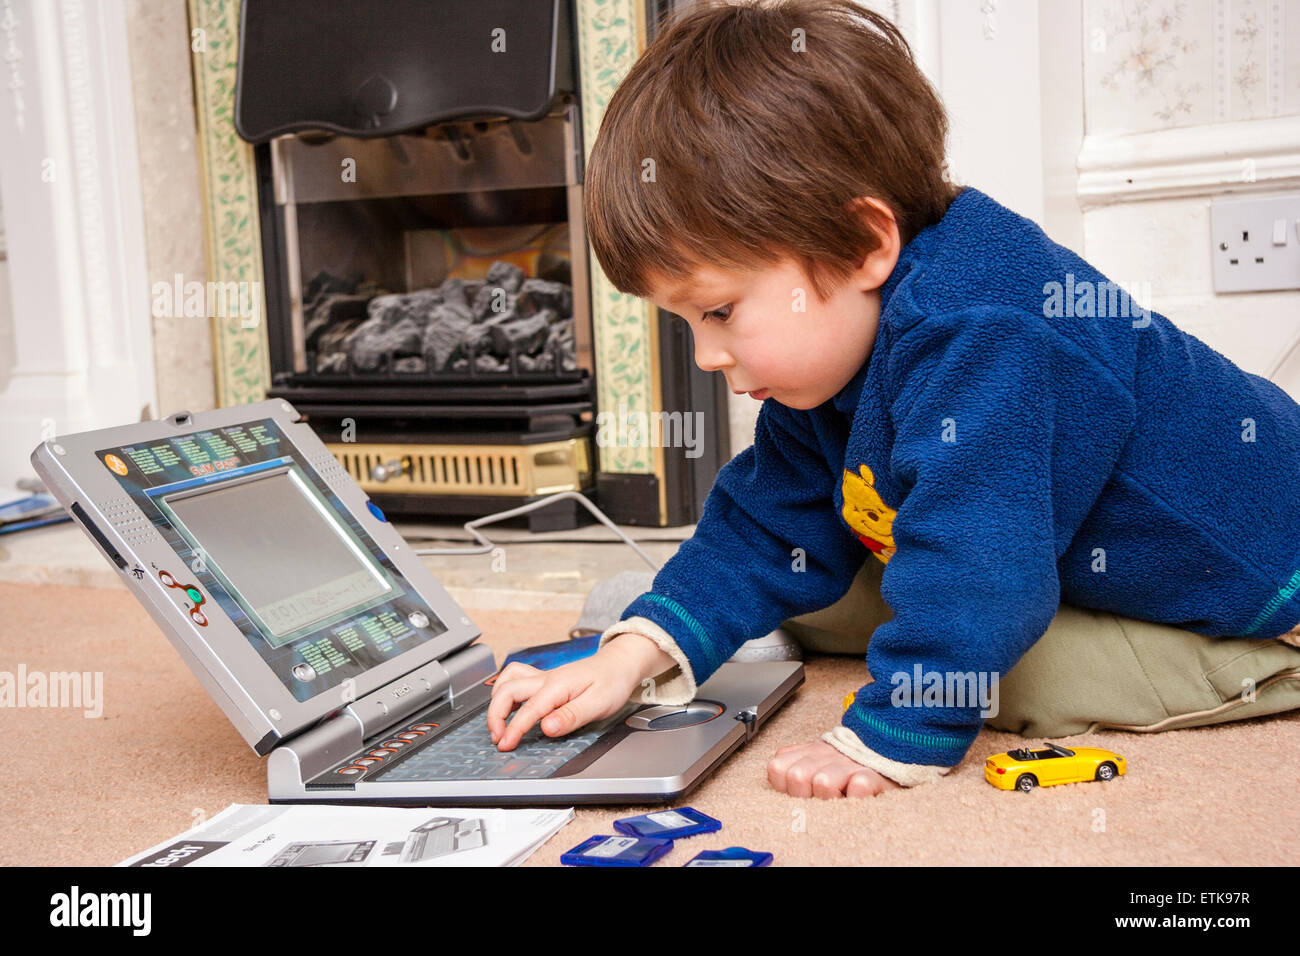 Young child, boy, 3-4 year old, indoors kneeling on carpet, playing intently with children's V-Tech laptop computer, learning basic computering skills Stock Photo